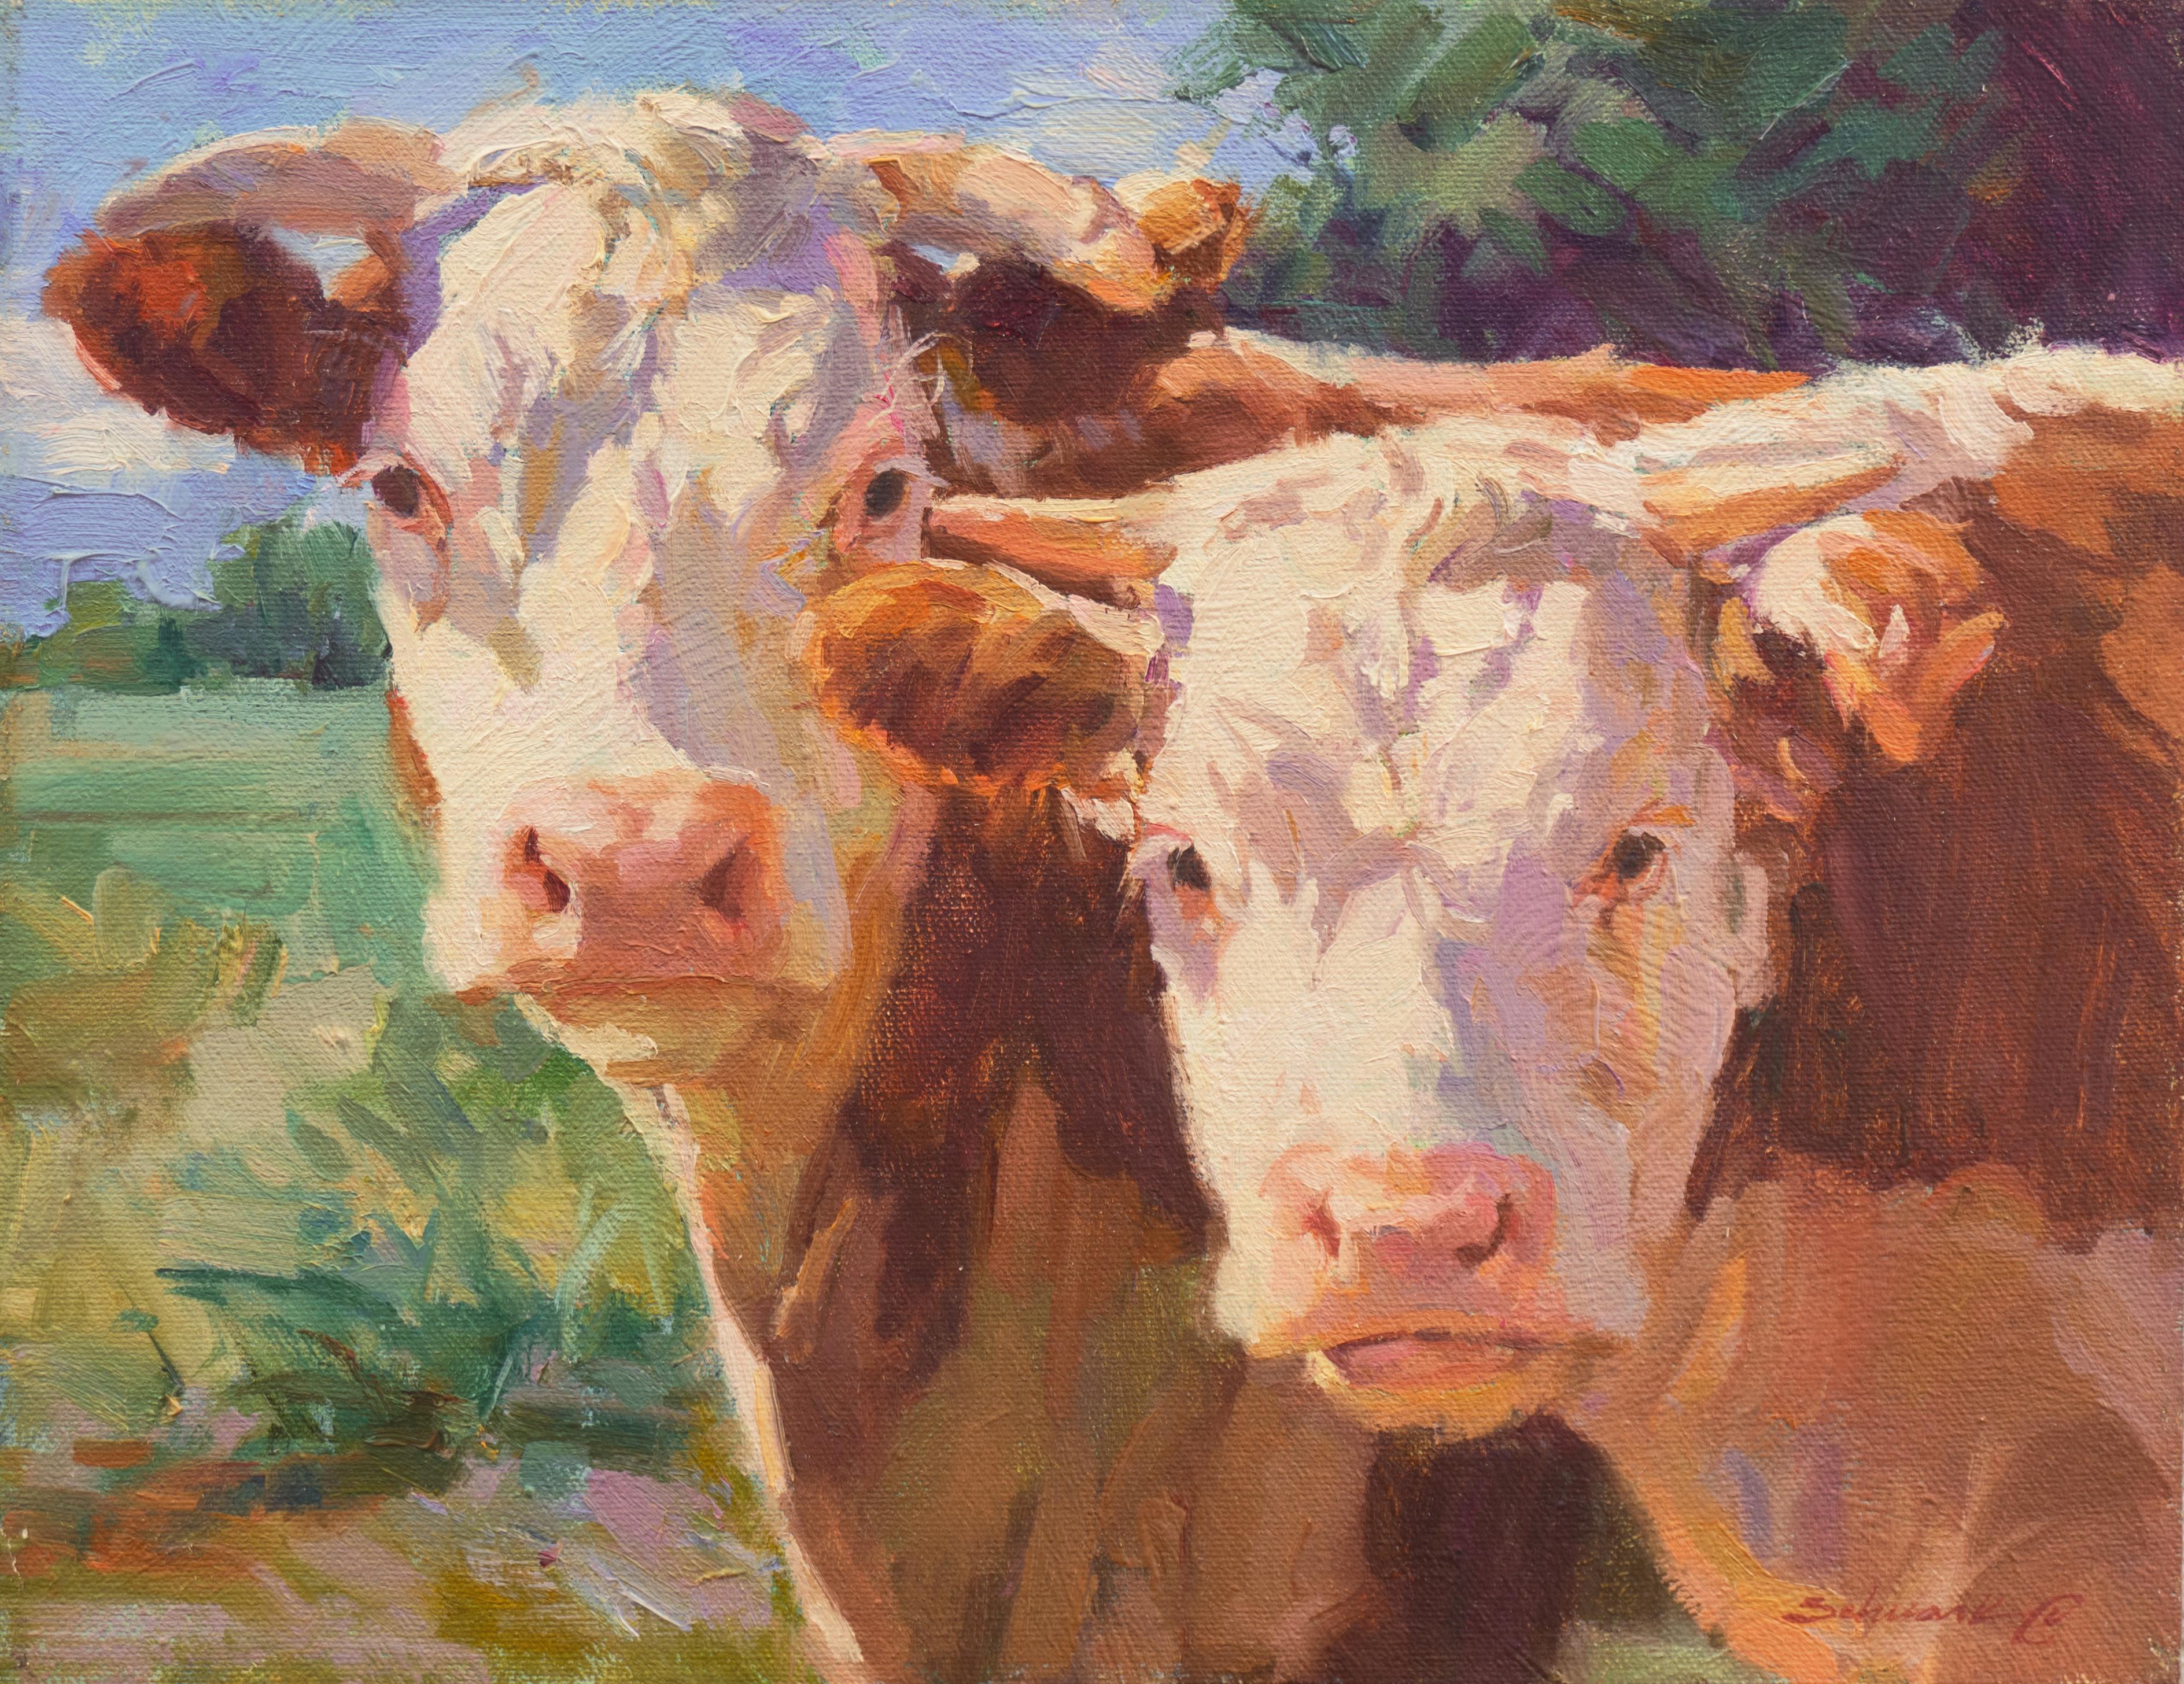 'A Curious Pair', New Mexico Woman Artist, Oil Painters of America, Michigan